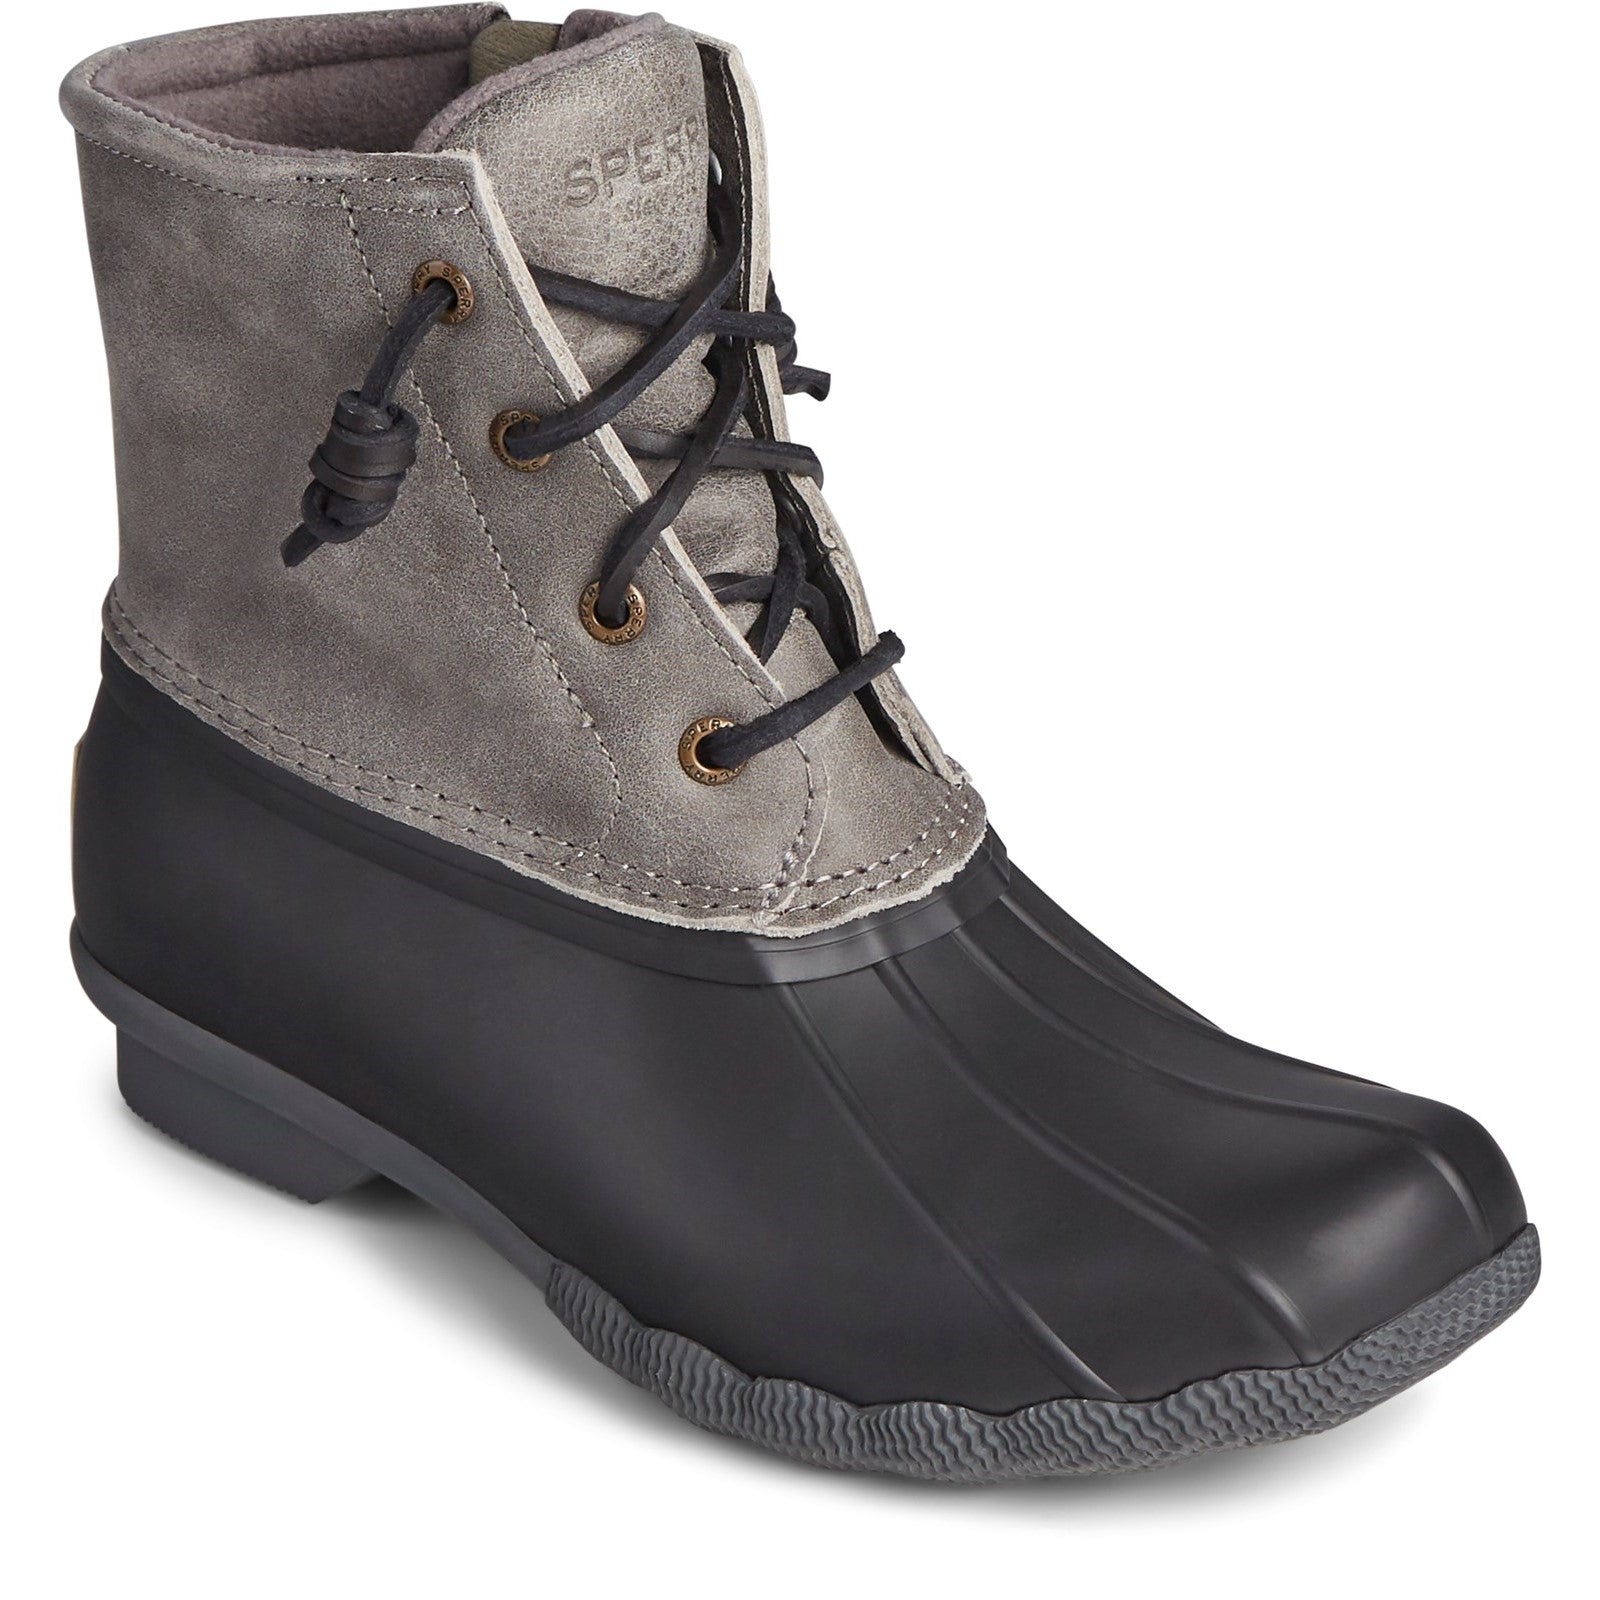 Sperry Womens Saltwater Core Mid Boots - Black